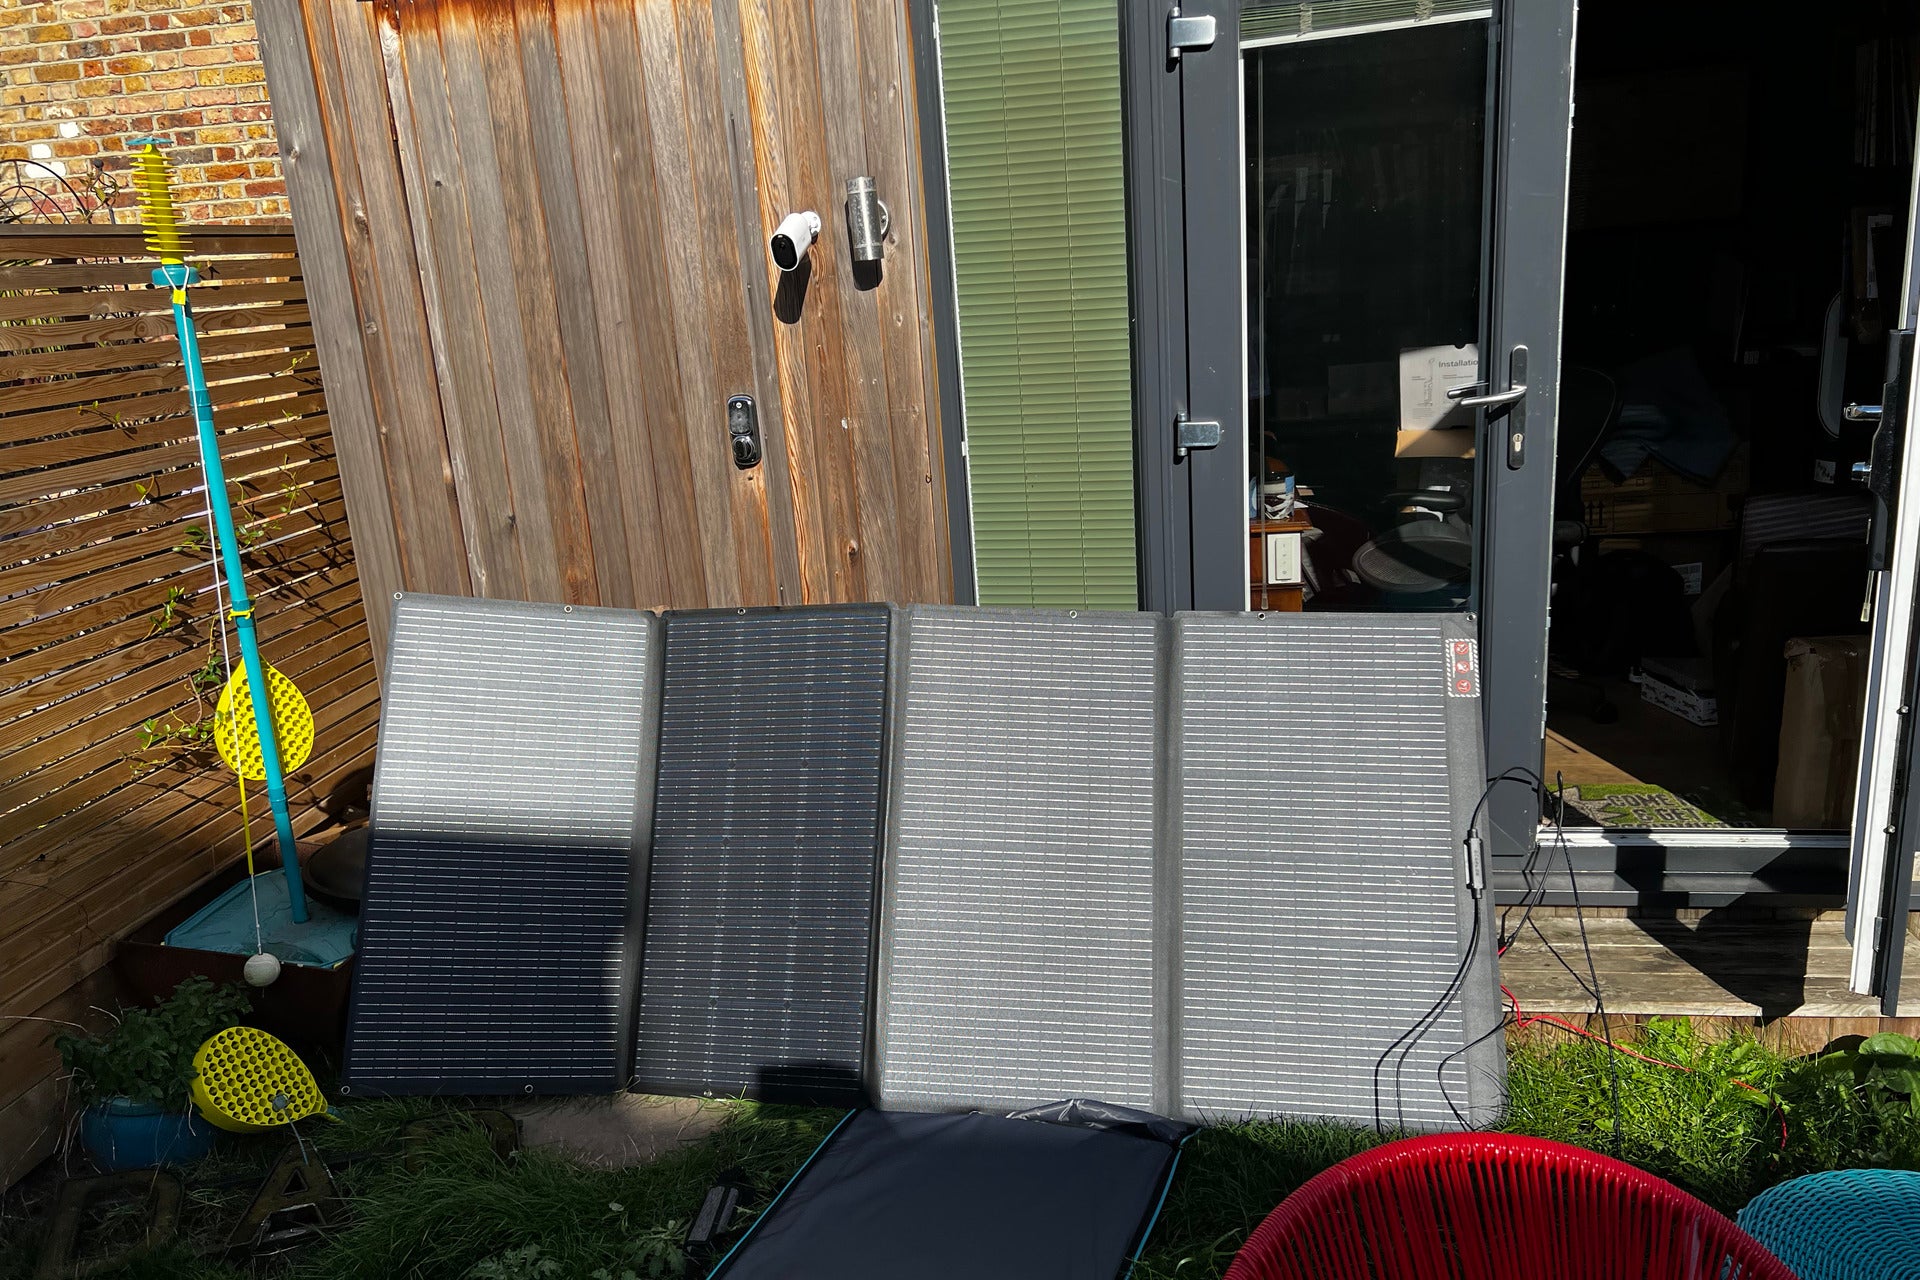 The EcoFlow Delta 2 solar panels in use